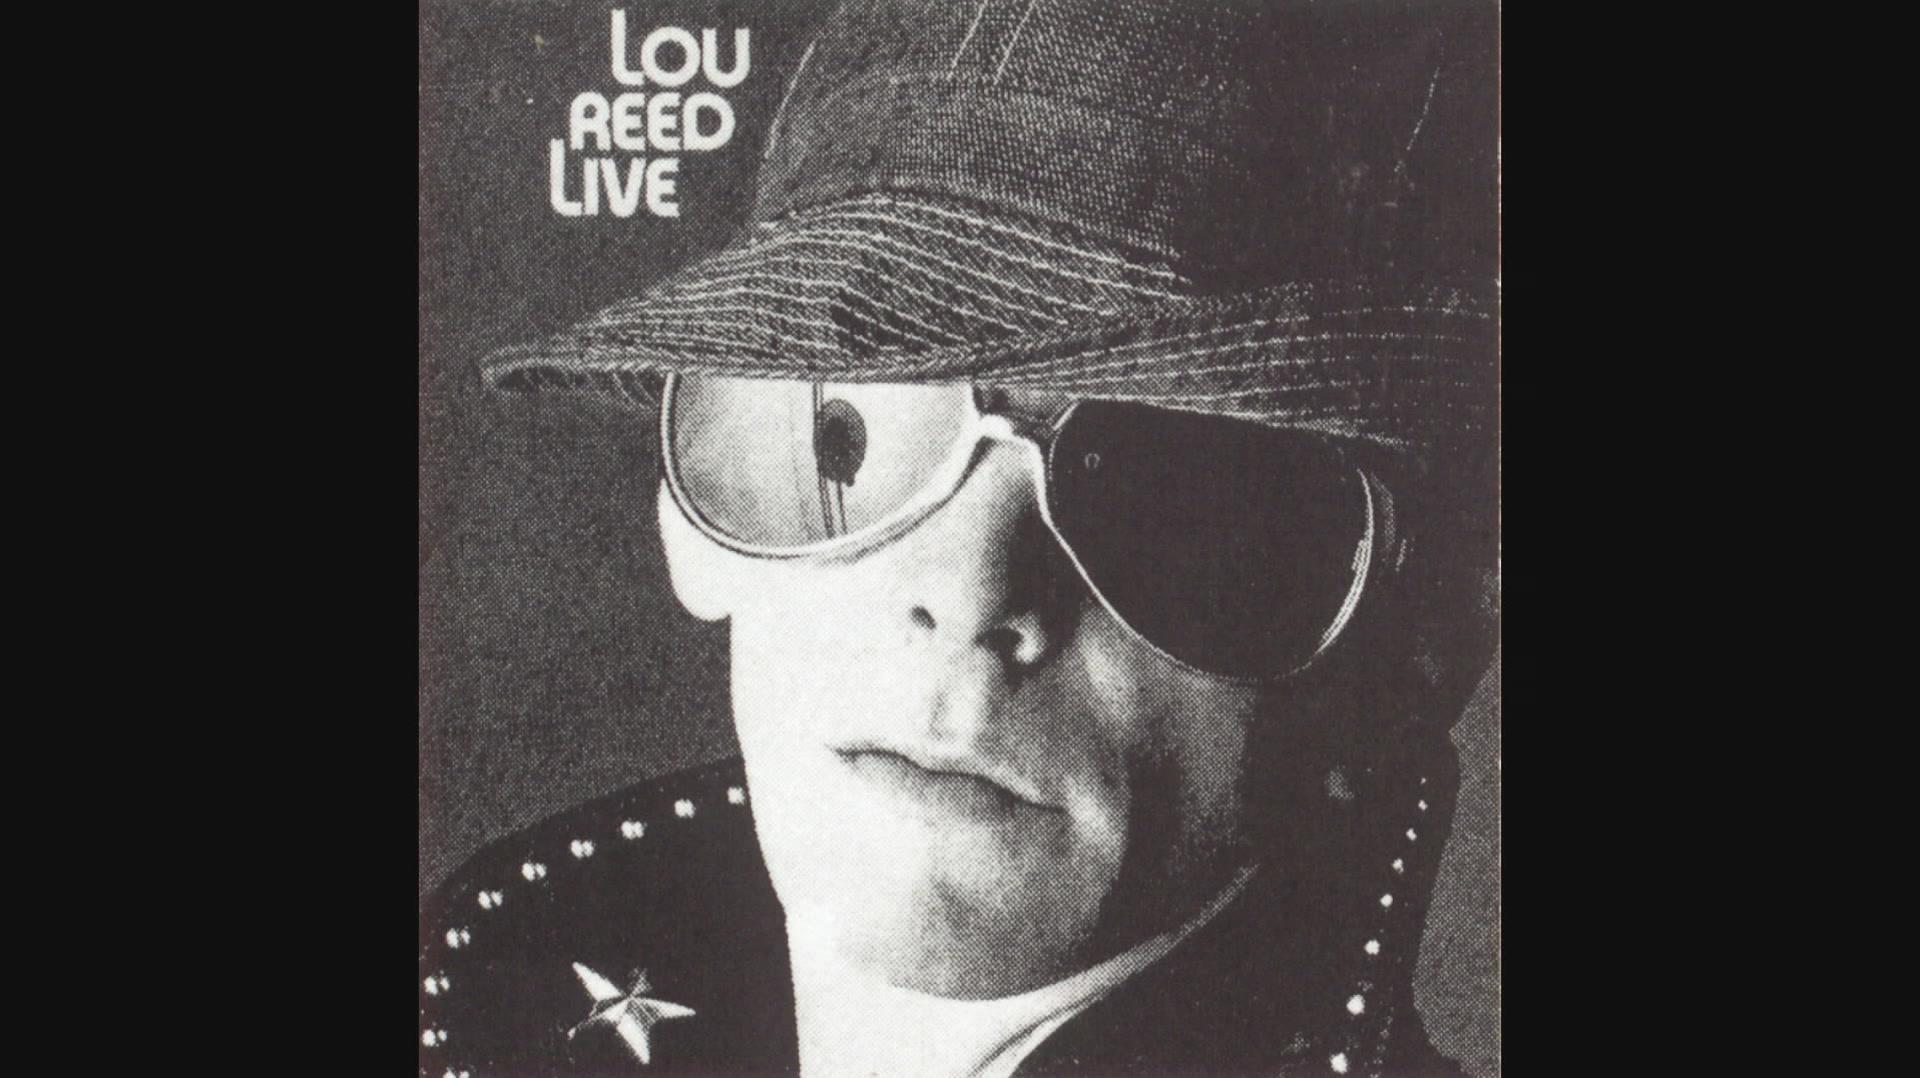 Lou Reed - I'm Waiting for the Man (audio) (from Lou Reed Live)